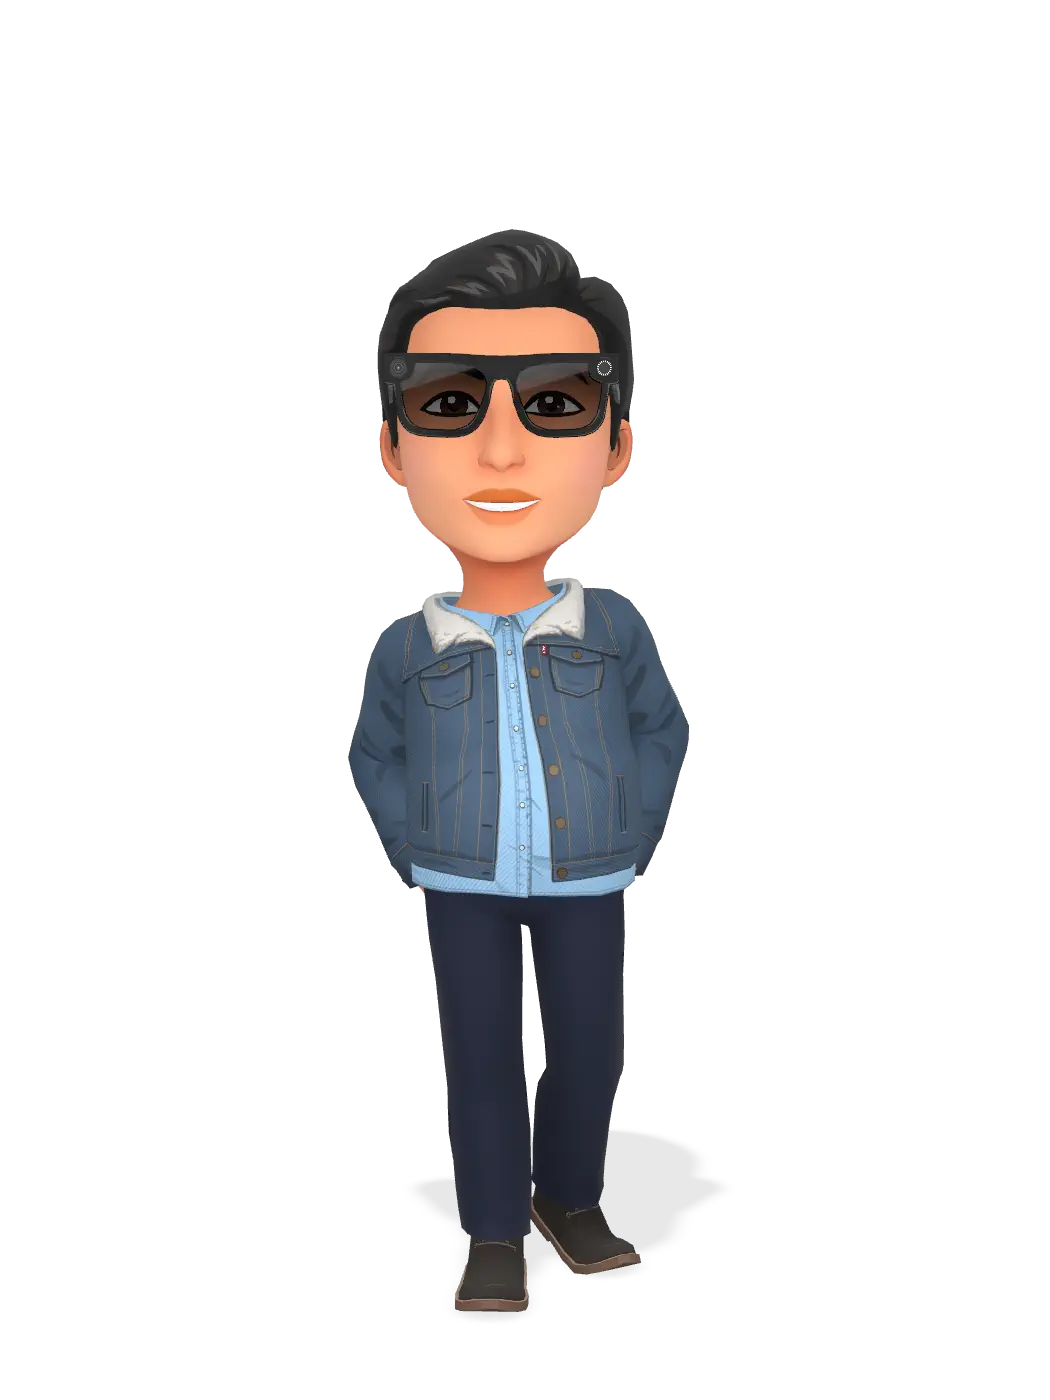 3D Bitmoji for pennyofficial1